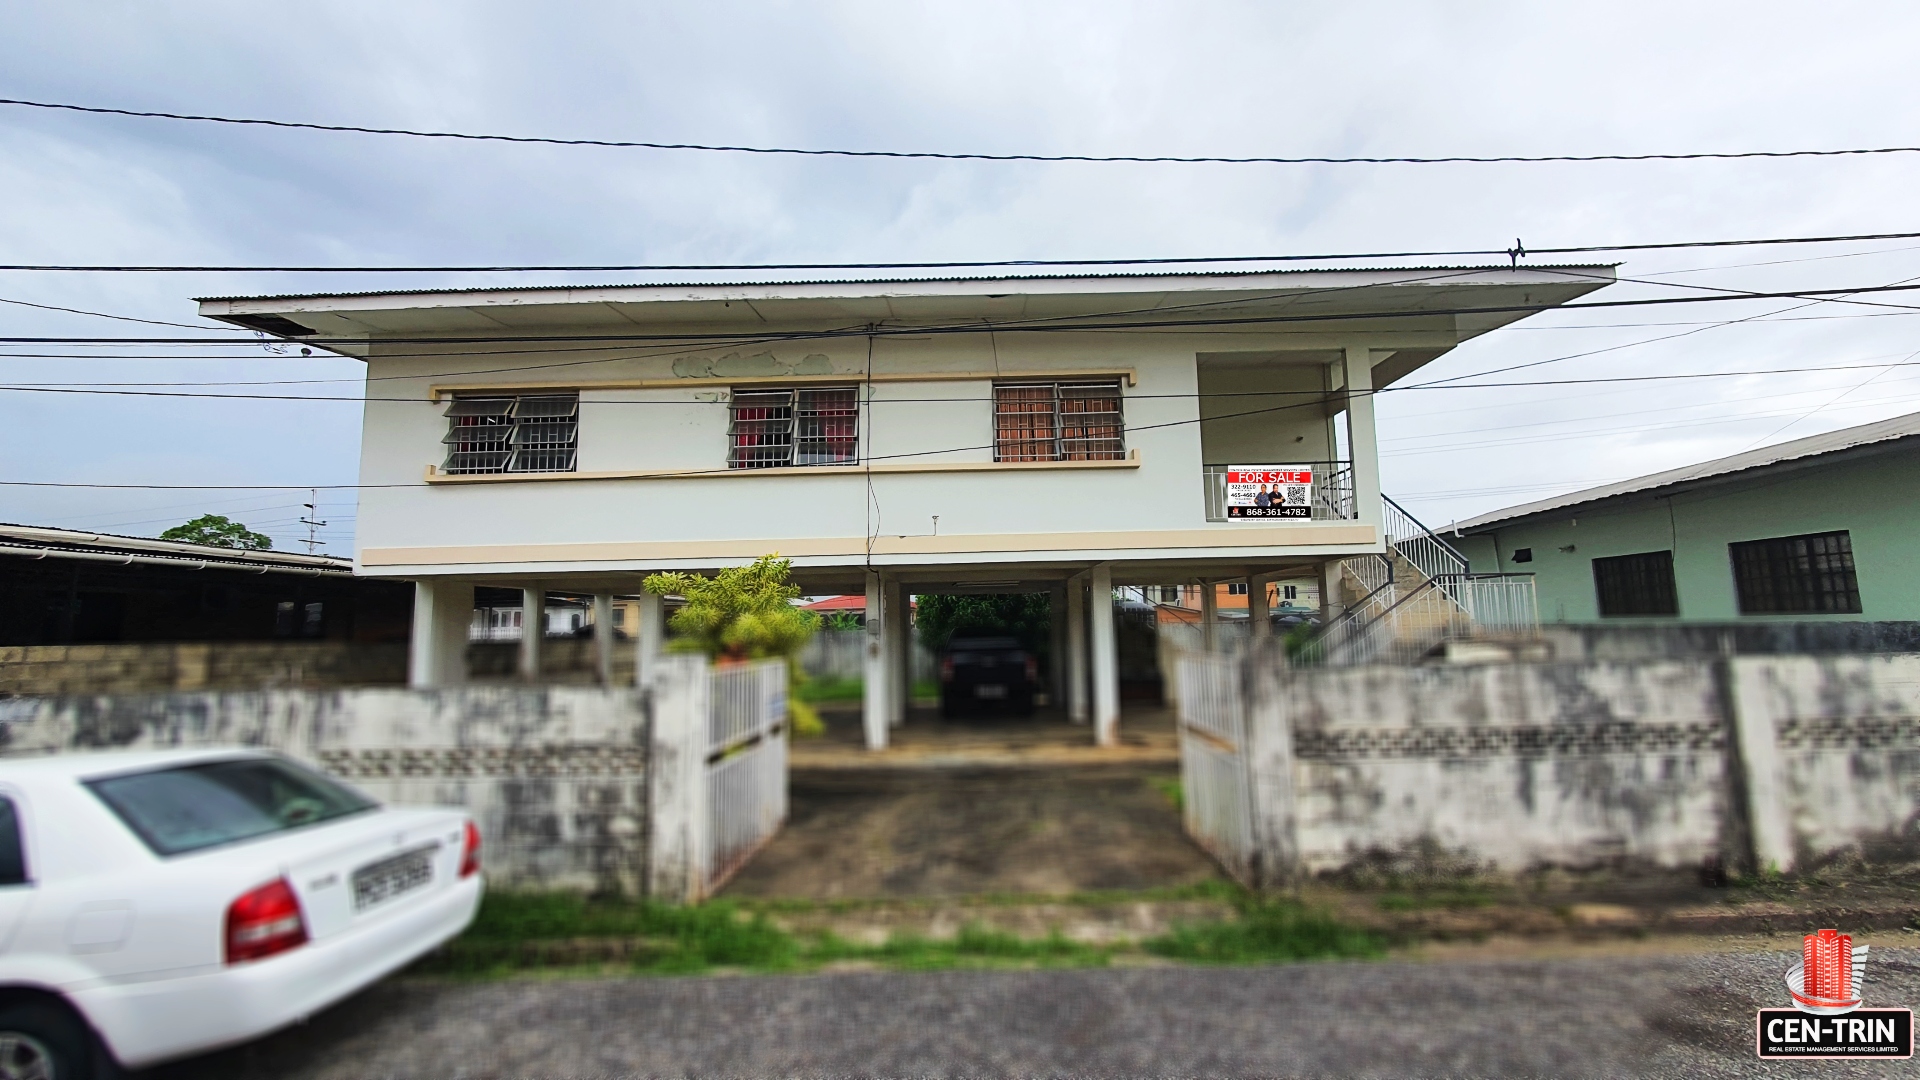 Tunapuna Investment Property: 3-bedroom house with front porch, ideally located near Eastern Main Road and Priority Bus Route.